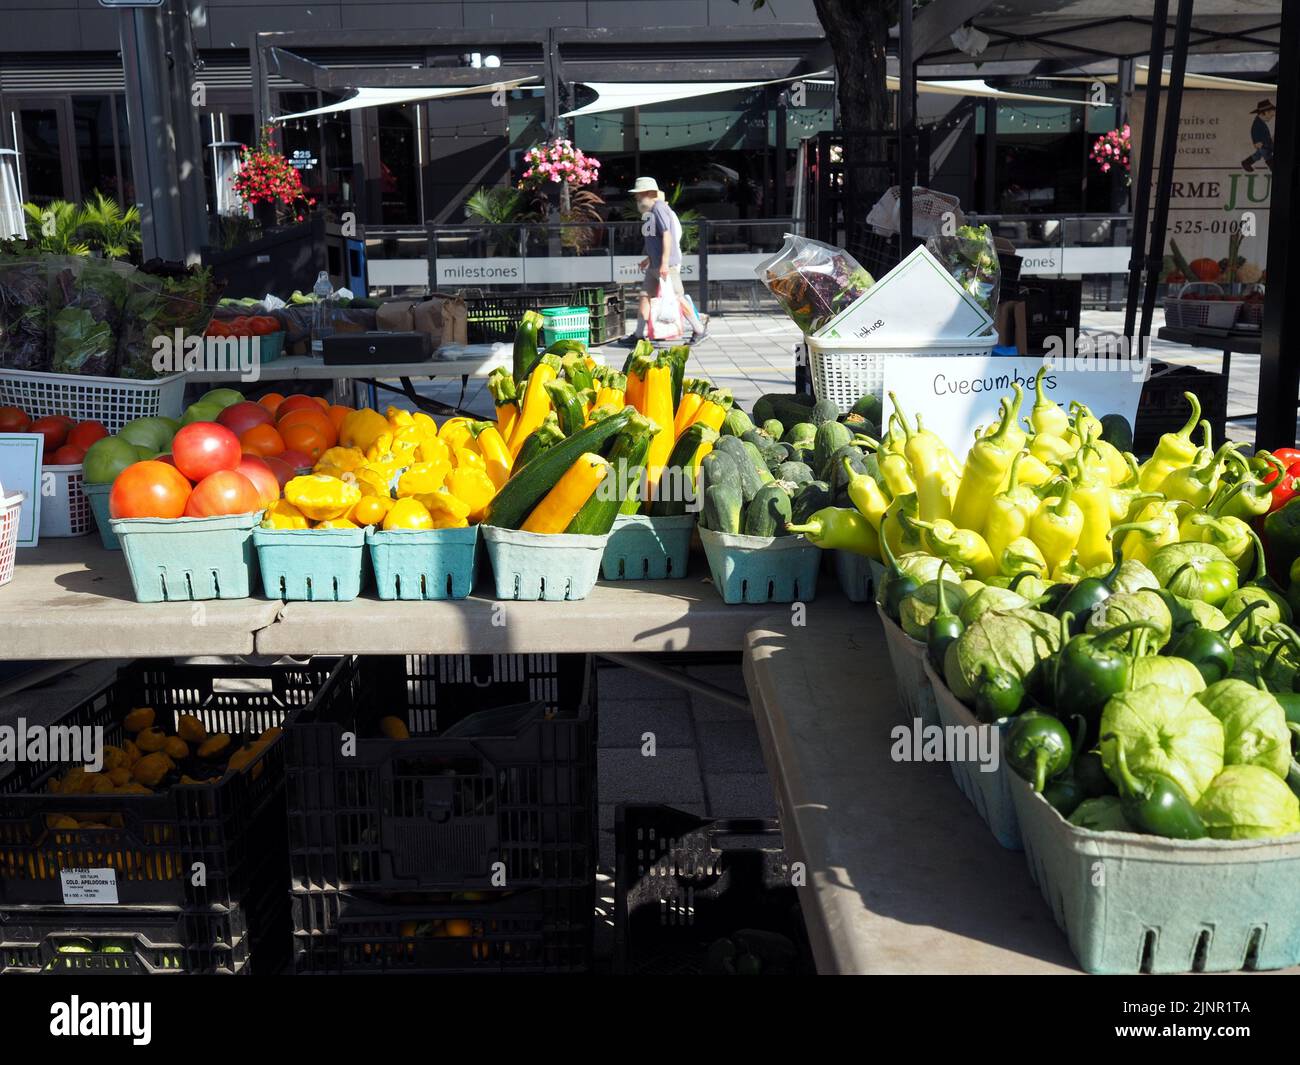 Scenes from the Farmer's Market at Lansdowne Place. Colorful farm produce stall. Ottawa, ON, Canada. Stock Photo